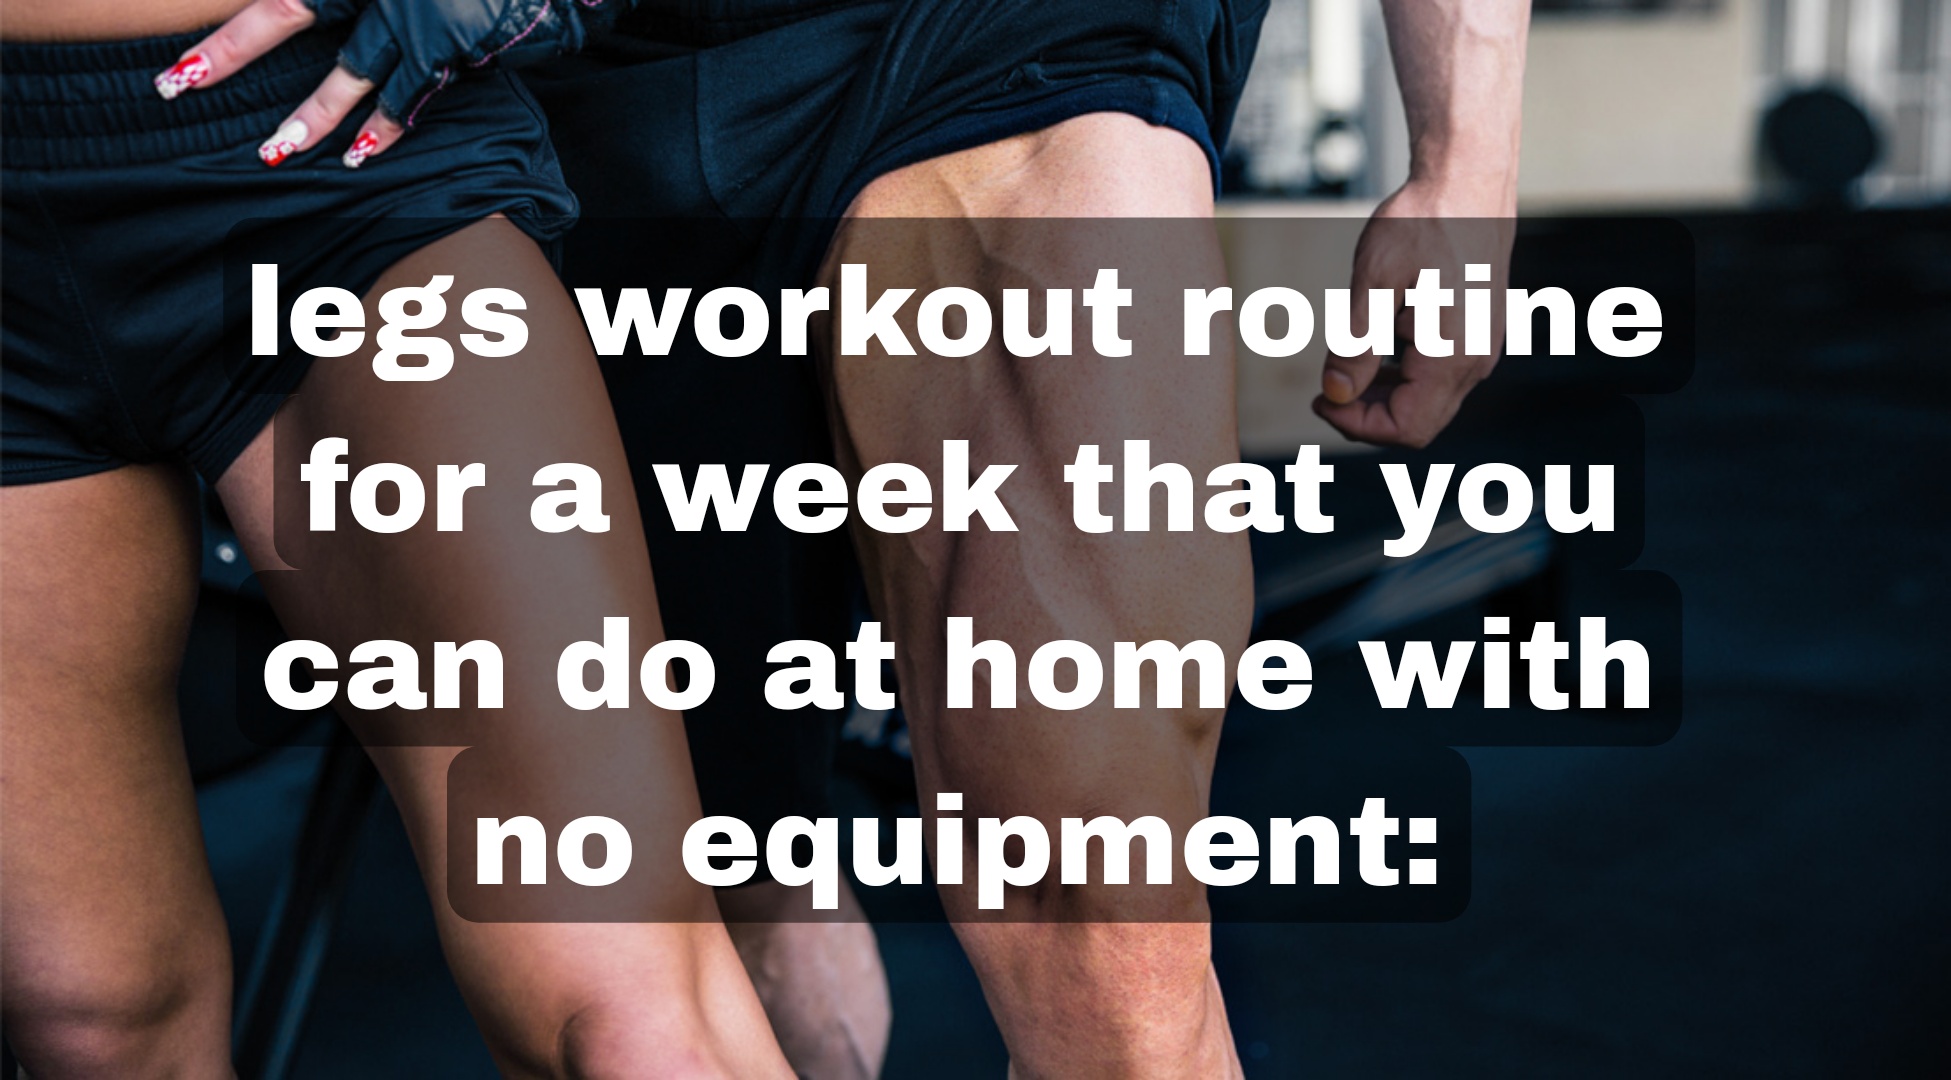 legs workout routine for a week that you can do at home with no equipment: